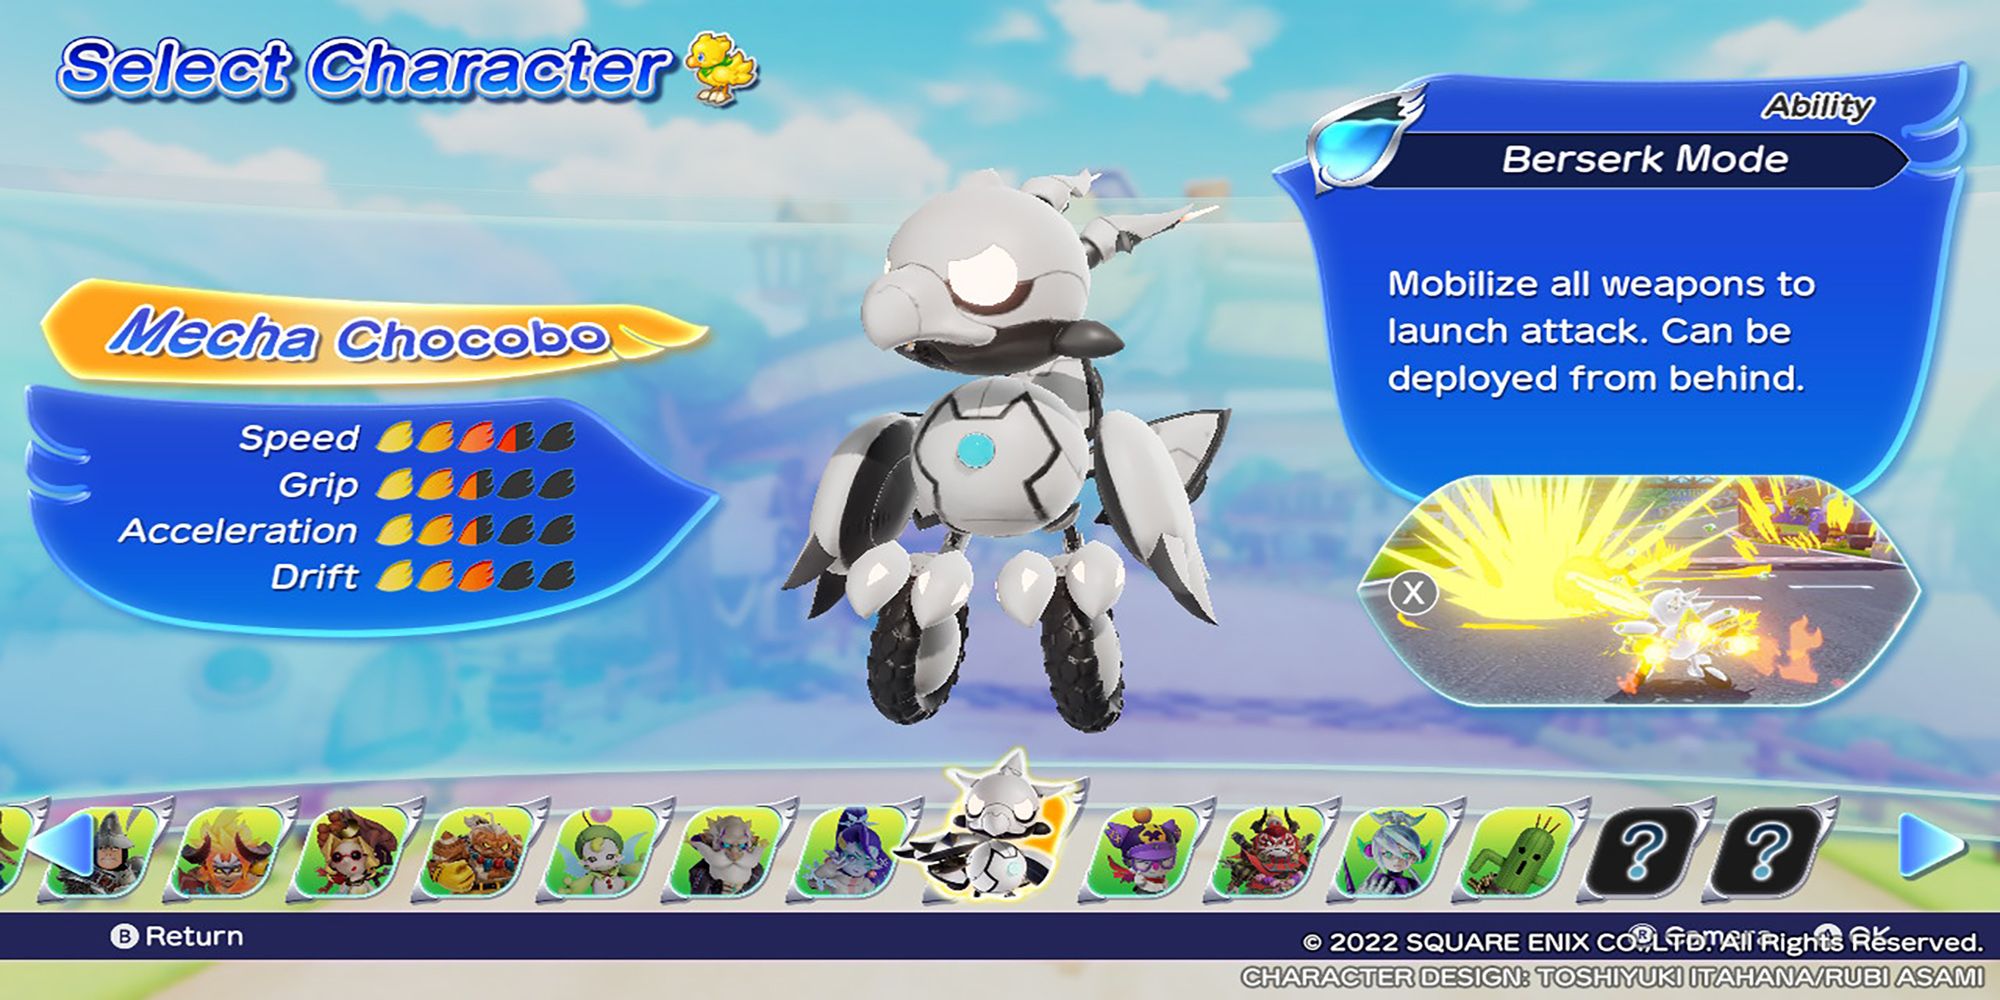 Mecha Chocobo's character model, along with their stats and abilities, in the Select Character menu. Chocobo GP.